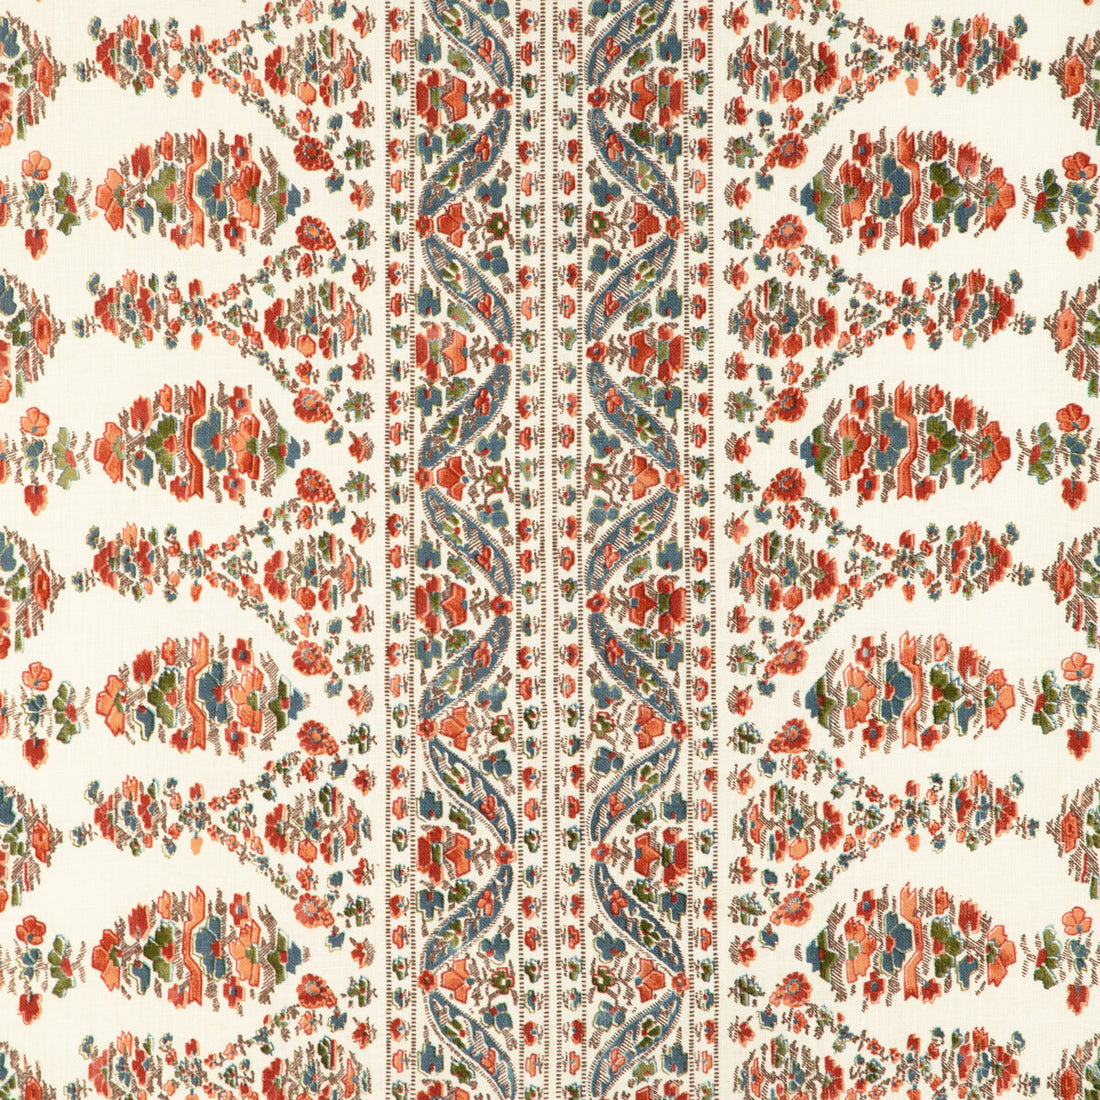 Visan Print fabric in sky/coral color - pattern 8023108.512.0 - by Brunschwig &amp; Fils in the Cadenet collection